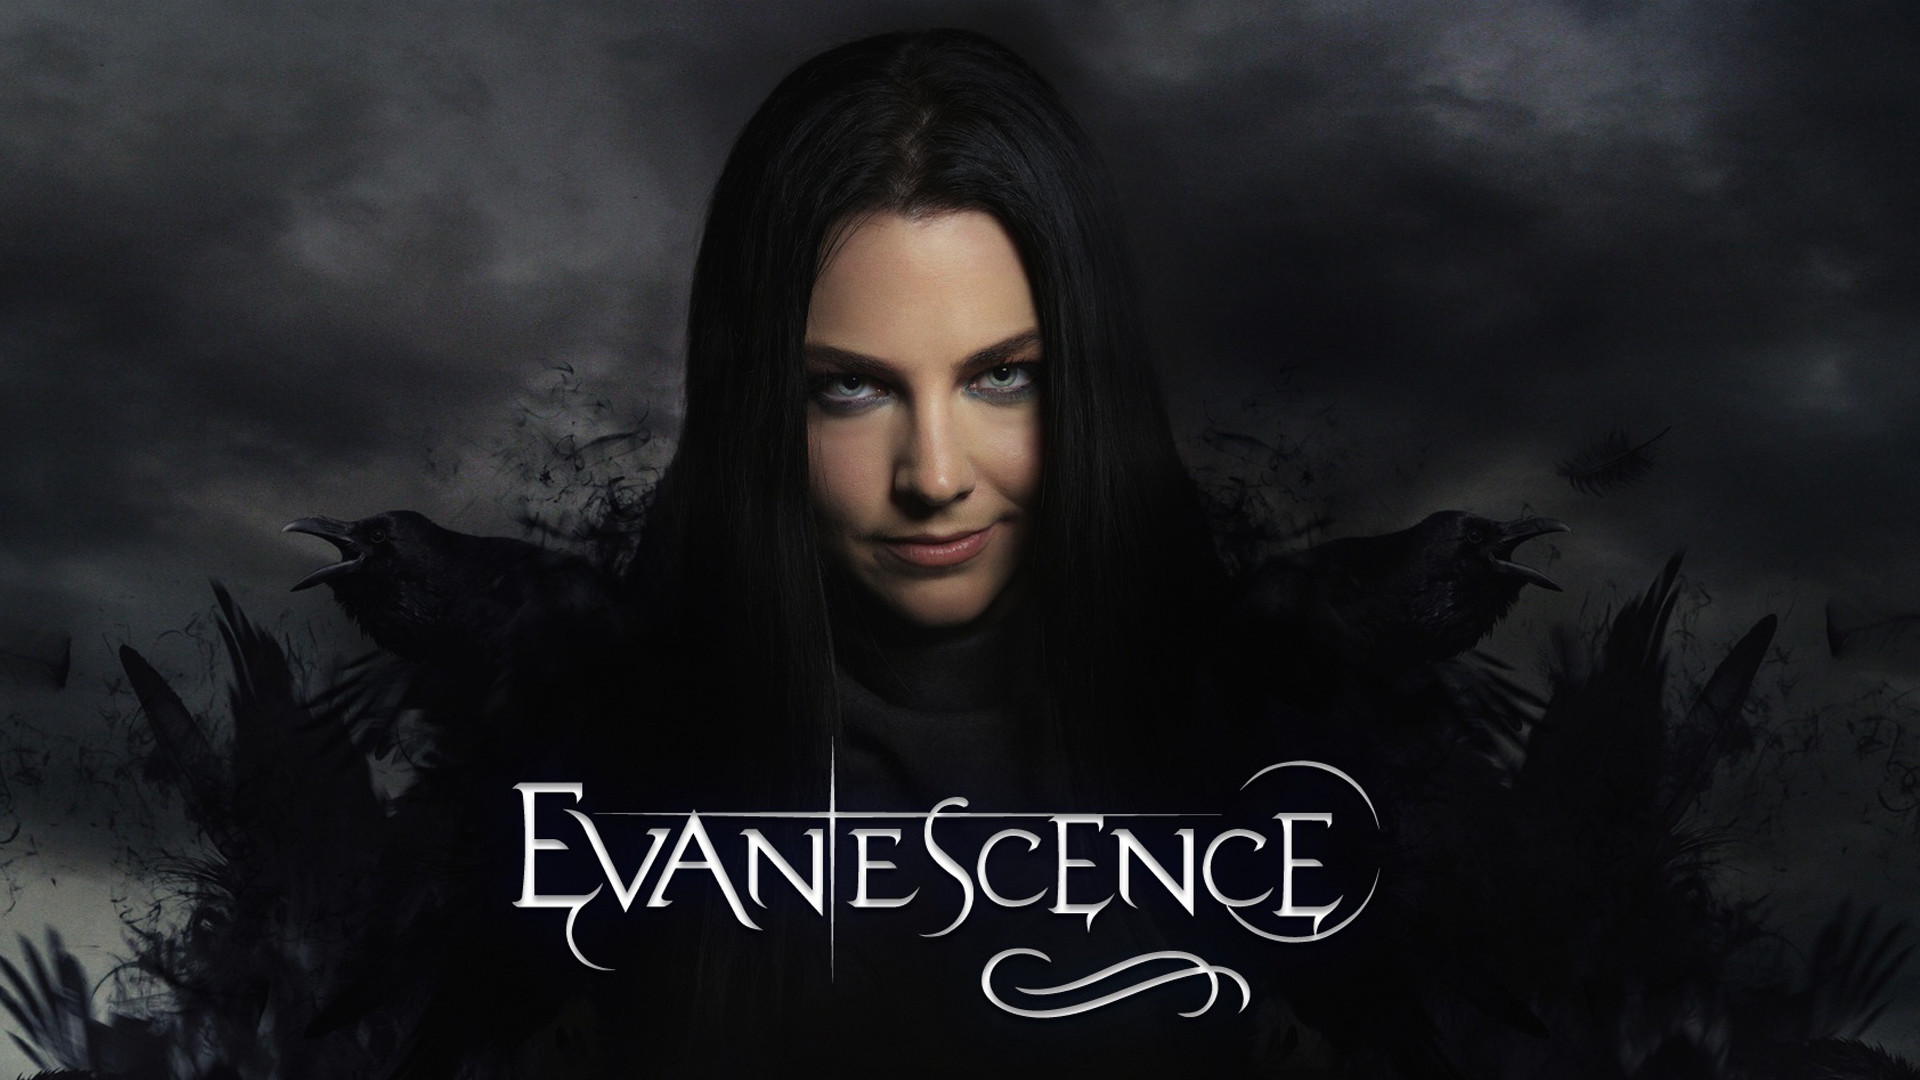 1920x1080 ... Evanescence Pictures Evanescence Wallpaper Evanescence Wallpapers HD ...